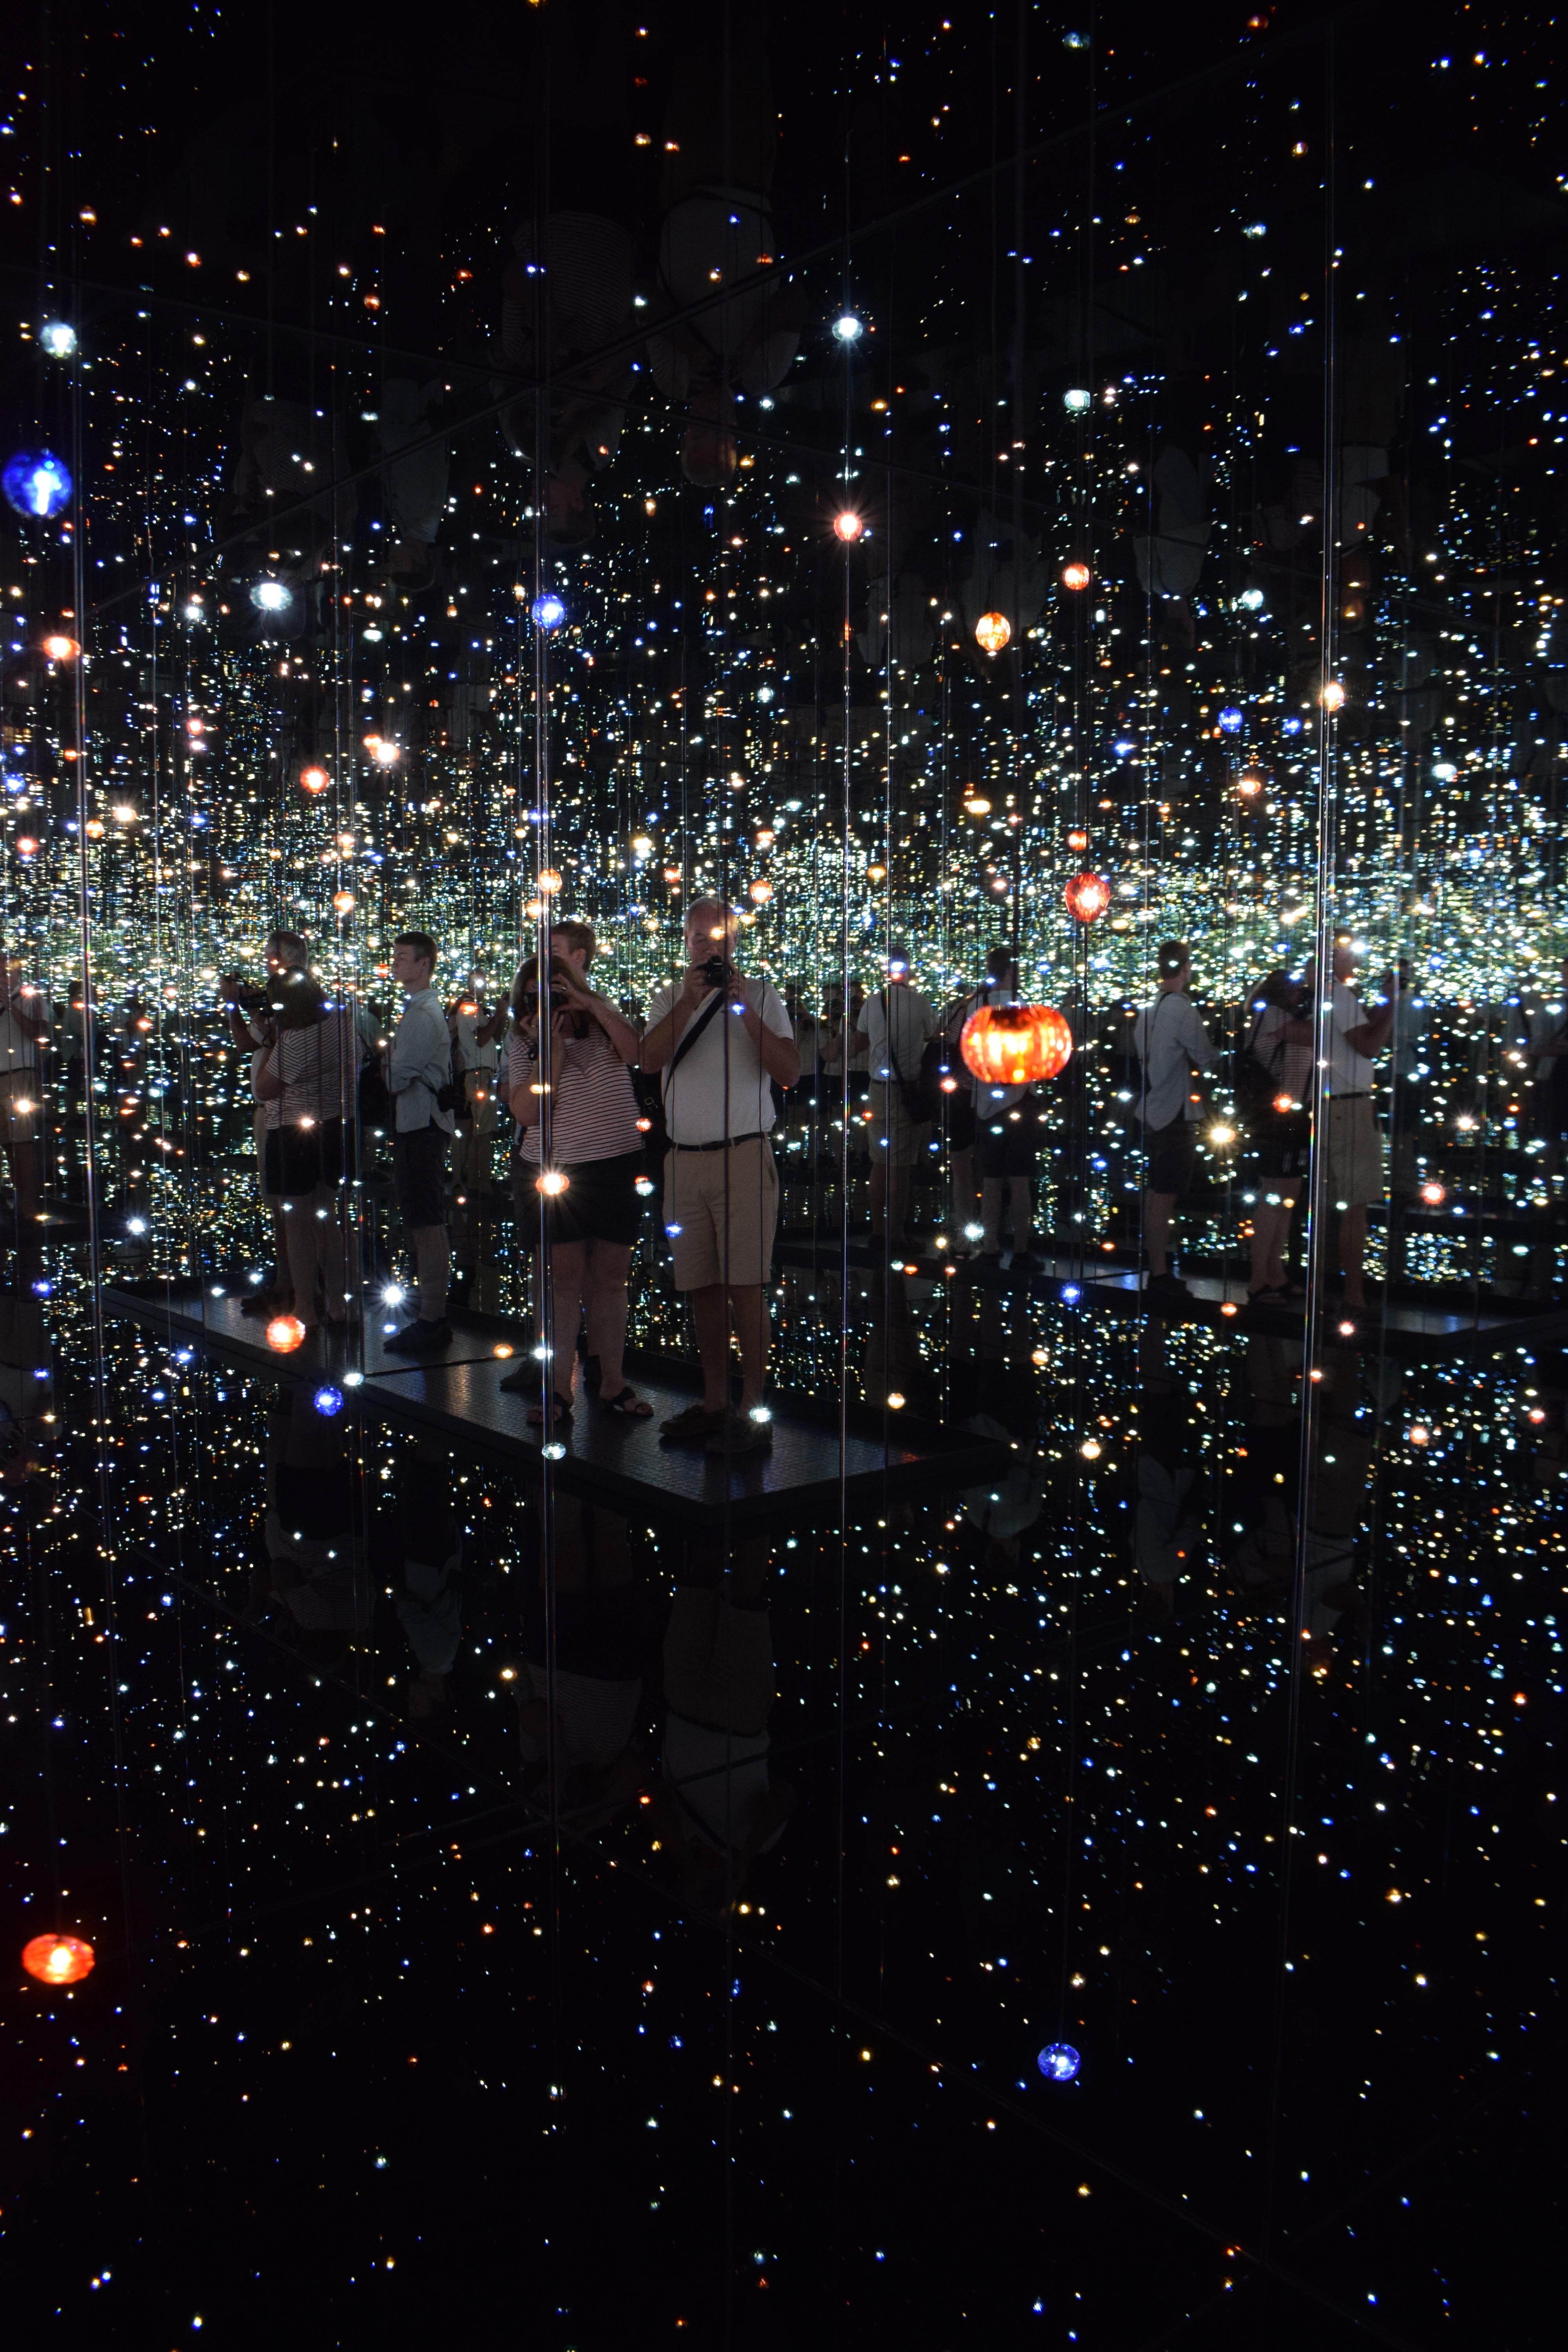 Kusama's Infinity Mirrors at The Broad, A Weekend in Los Angeles